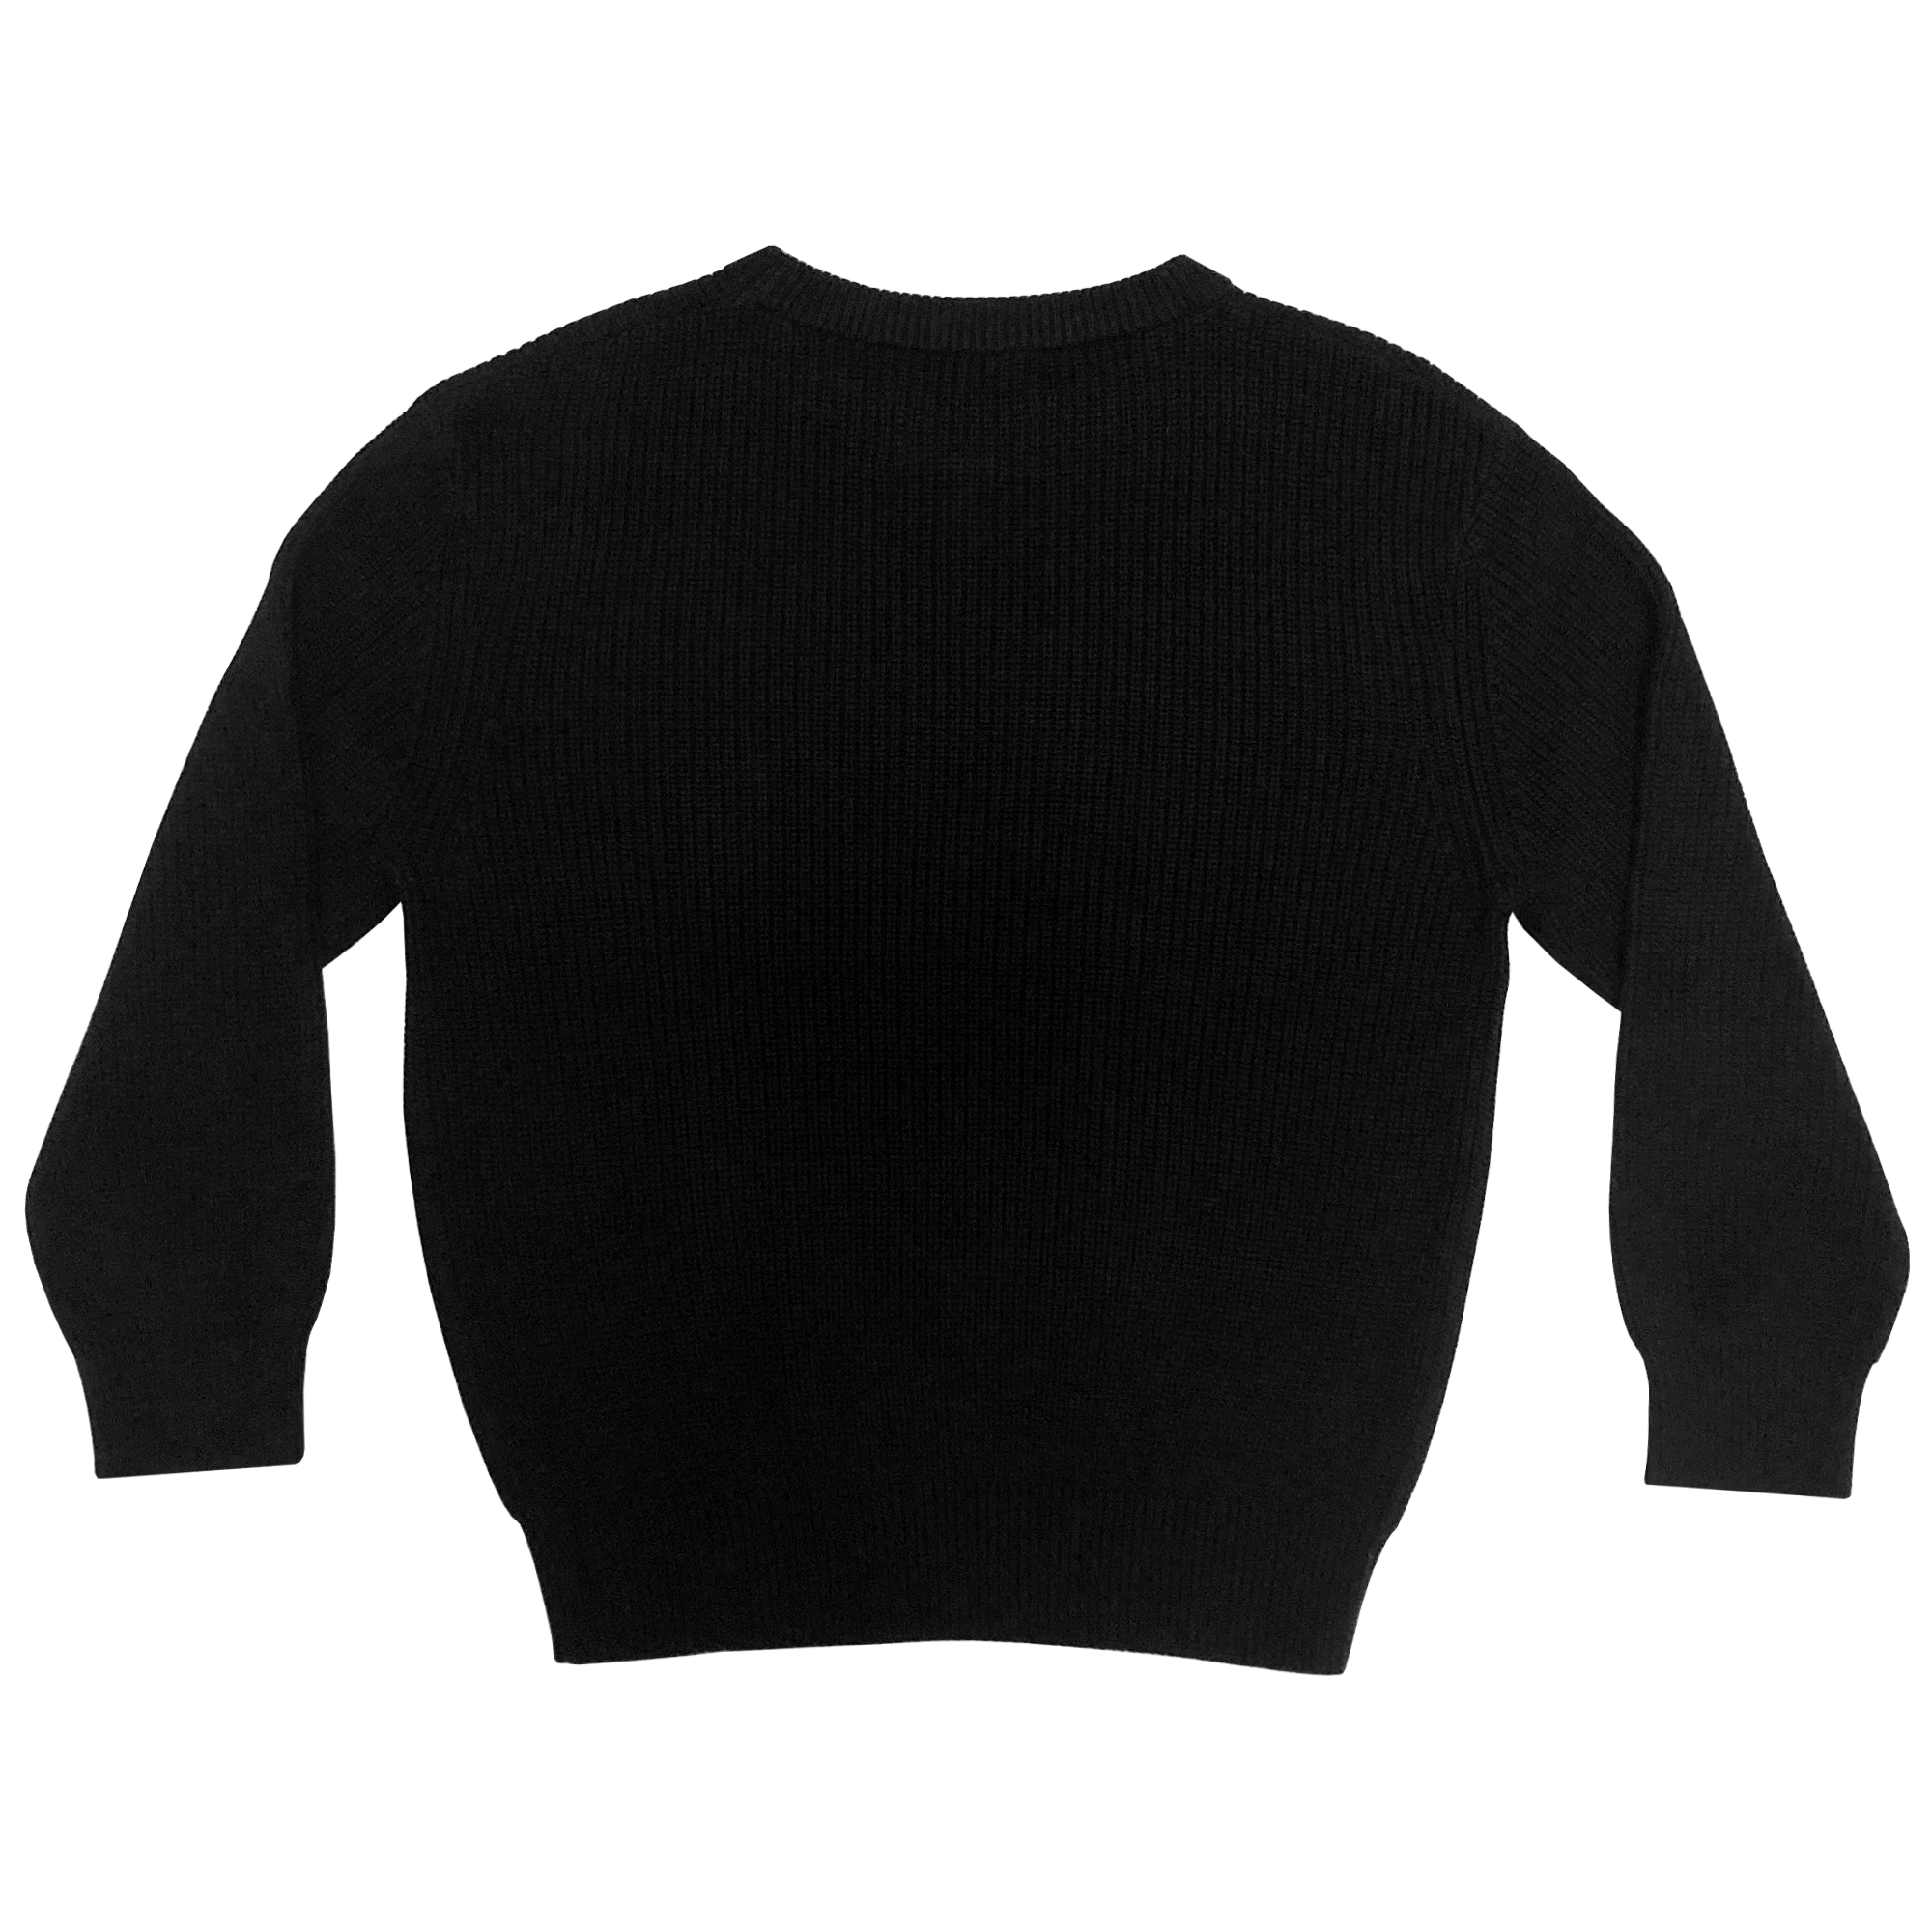 The backside of a heavy cotton knit sweater in black.